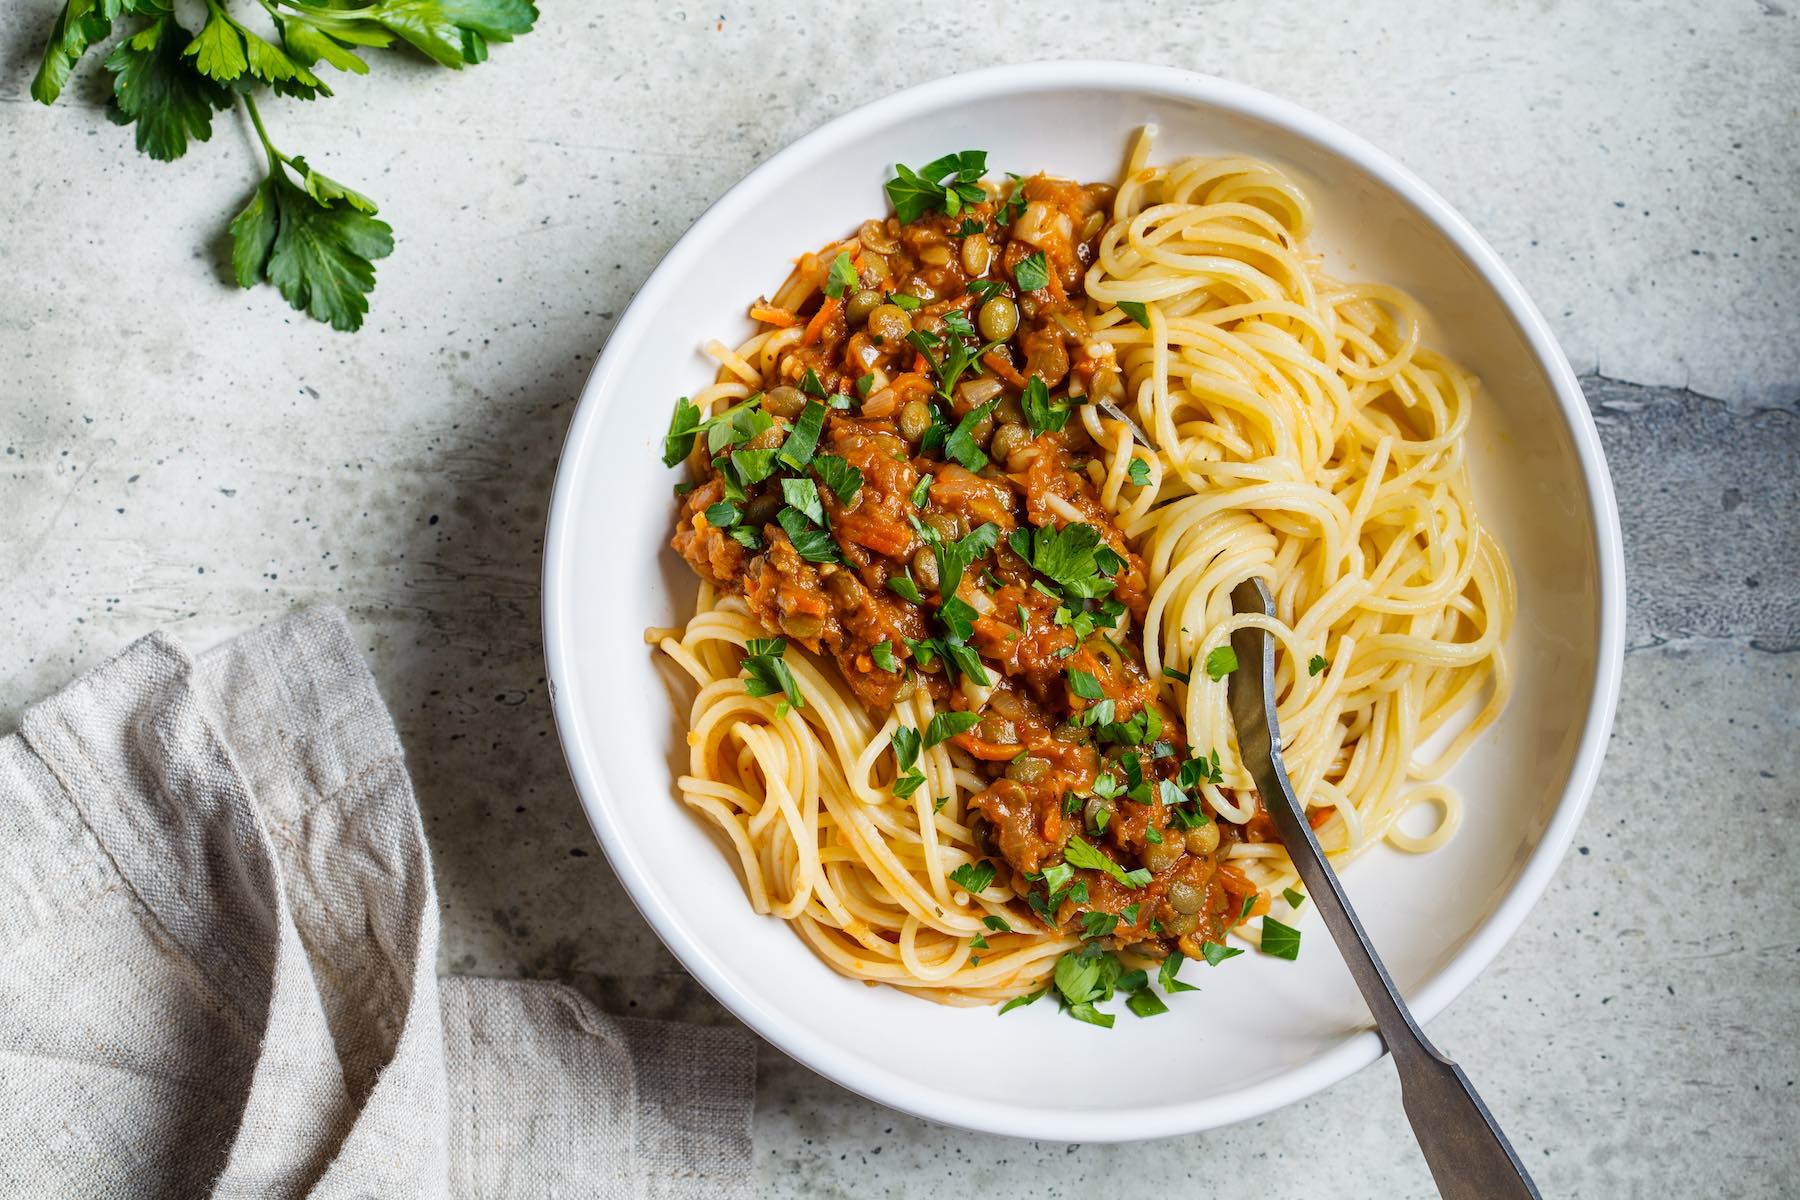 Vegetarian lentils bolognese pasta with parsley in a white dish. Healthy vegan food concept.